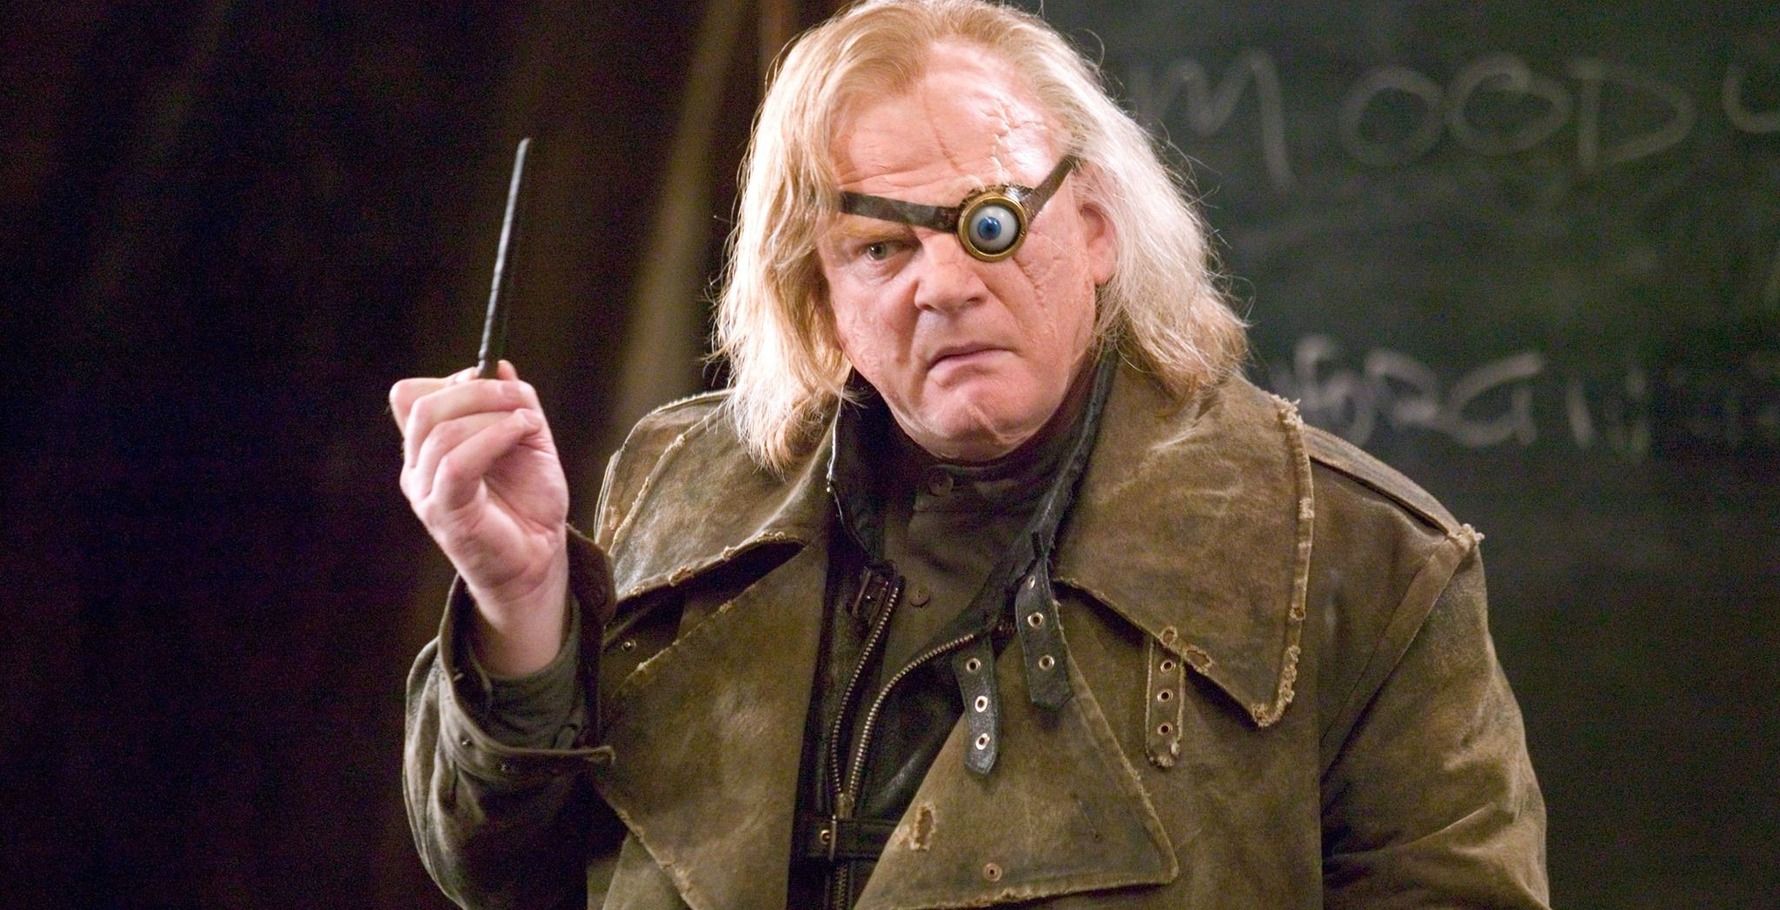 What creature does the impostor Mad-Eye Moody demonstrate the unforgivable curses on?